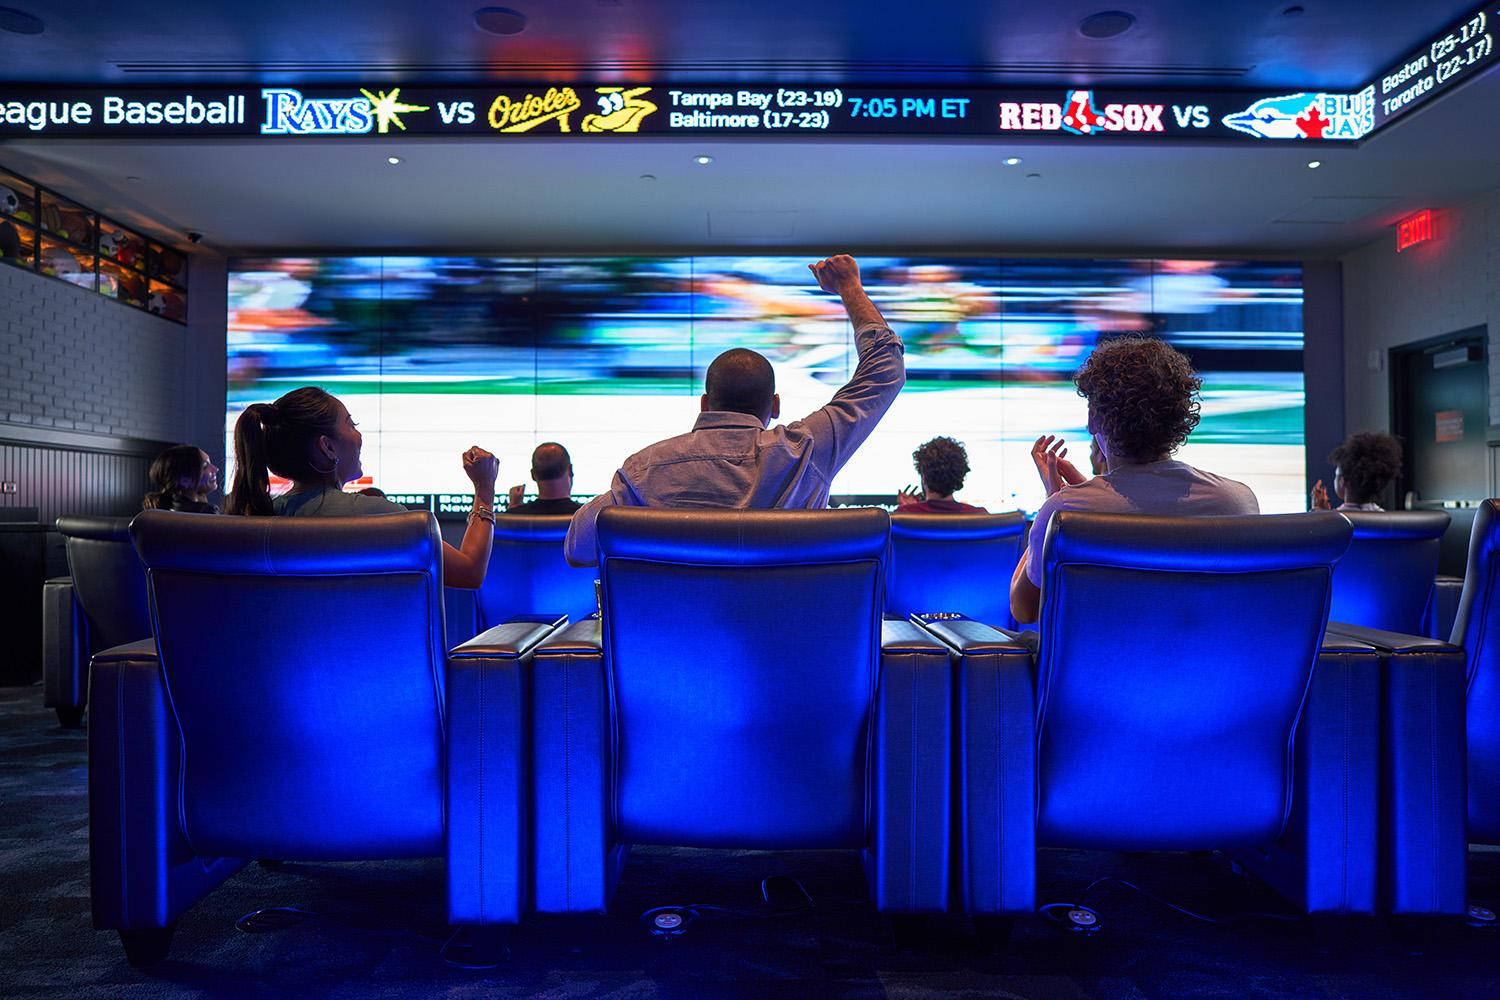 People cheering their team in a theater watching sports